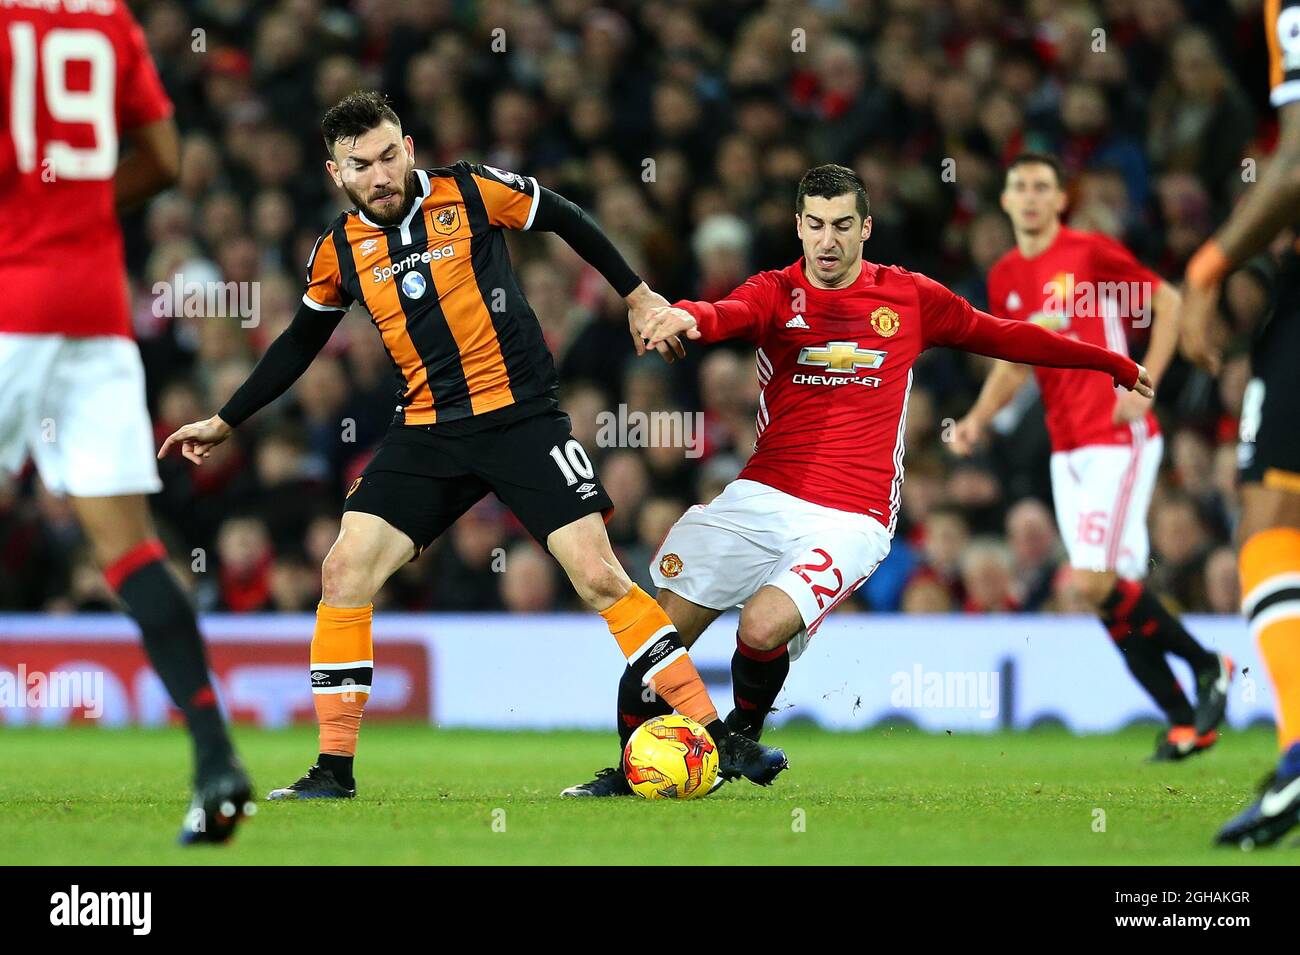 Henrikh Mkhitaryan of Manchester United challenges Robert Snodgrass of Hull City during the EFL Cup semi final 1st Leg match at Old Trafford Stadium, Manchester. Picture date: January 10th, 2017. Pic credit should read: Matt McNulty/Sportimage via PA Images Stock Photo